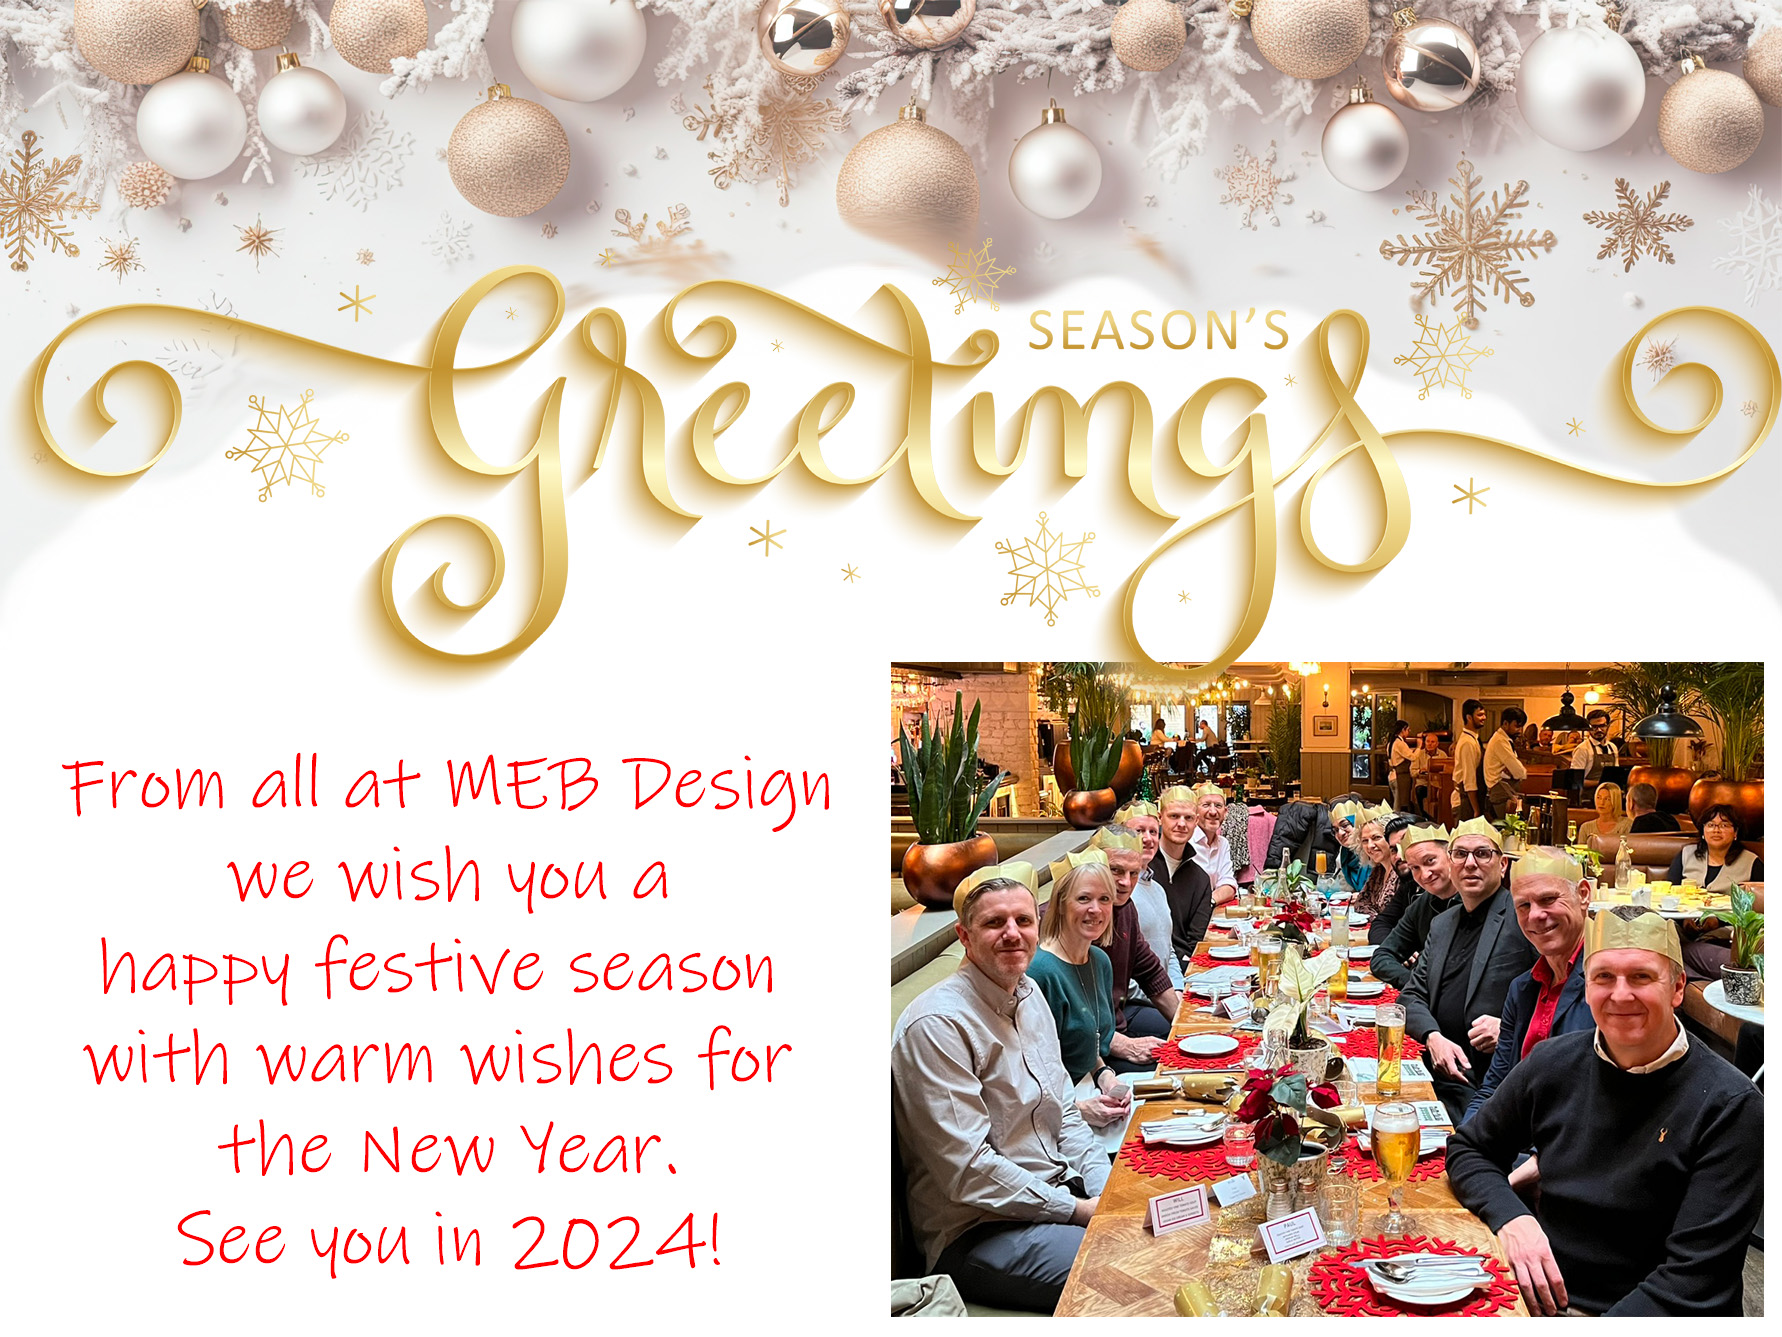 Season's Greetings from all at MEB Design!